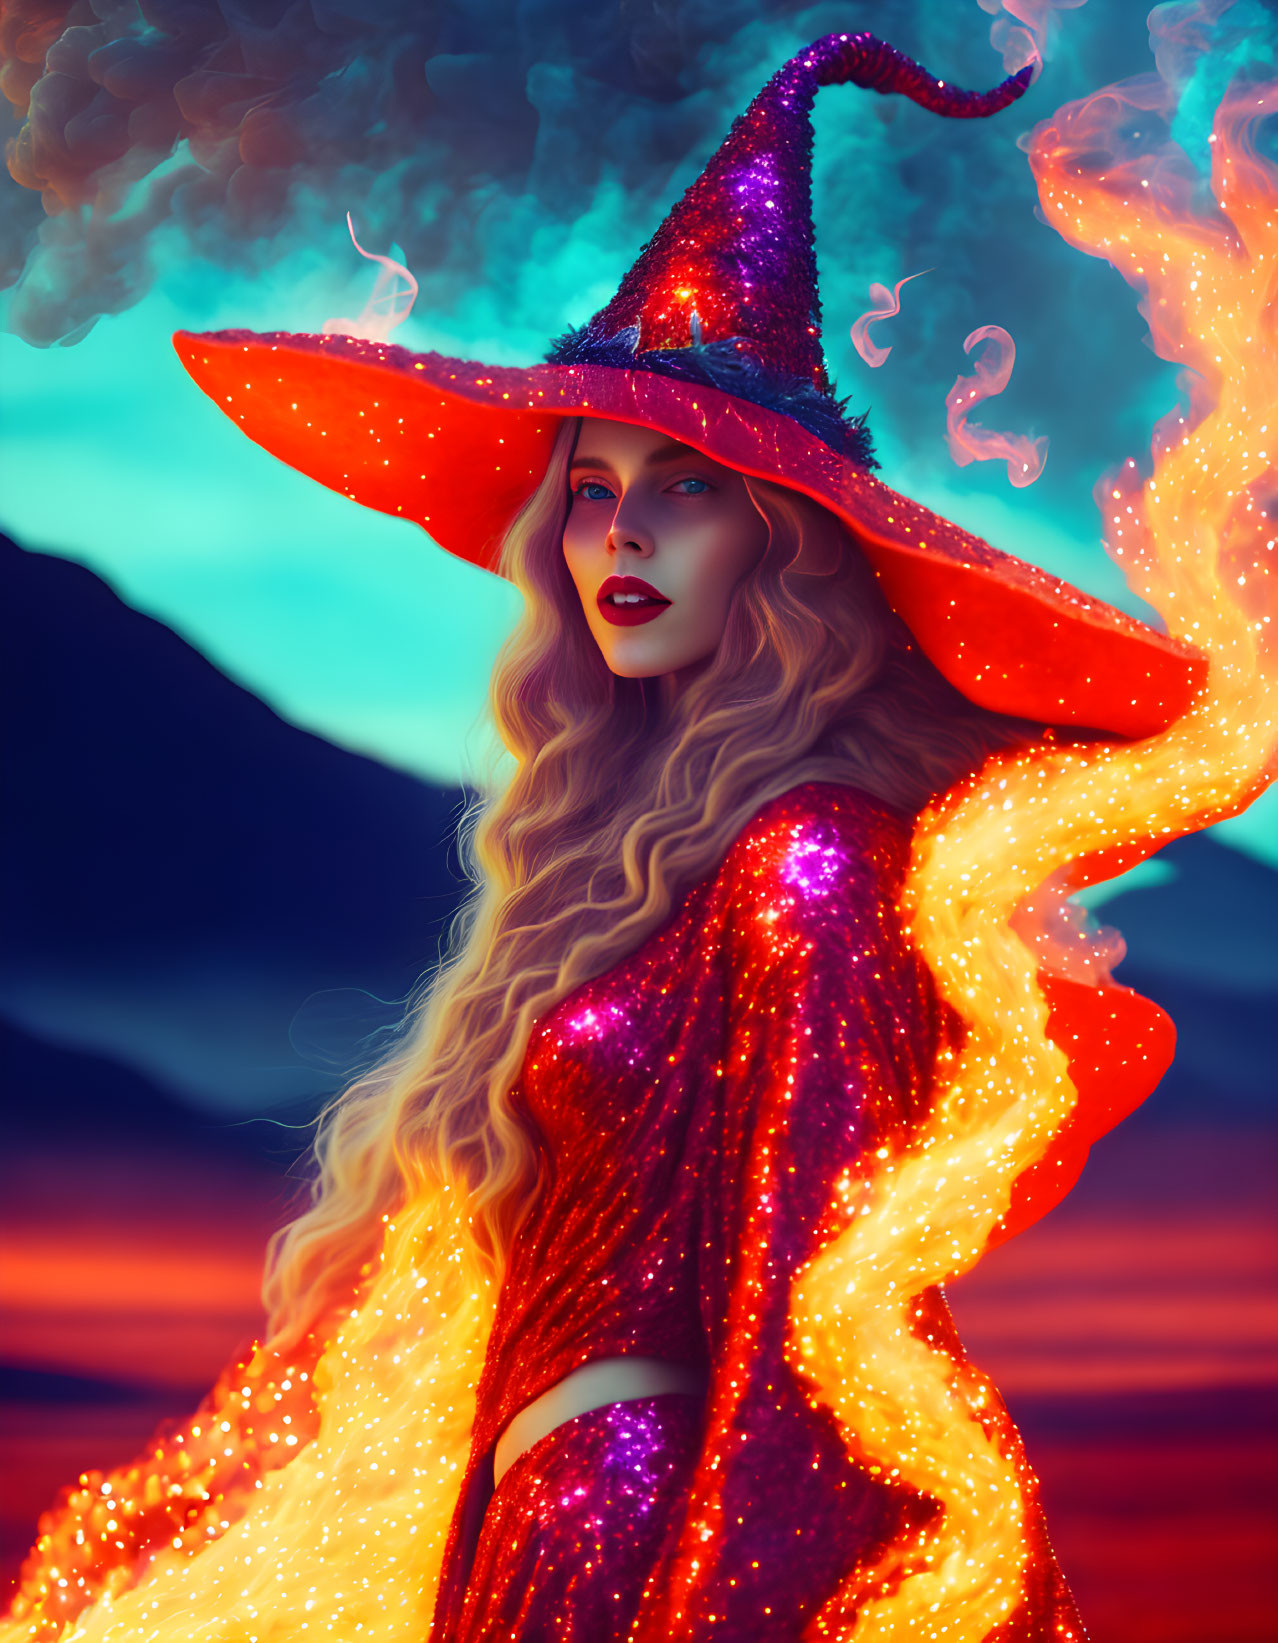 The sorceress of embers